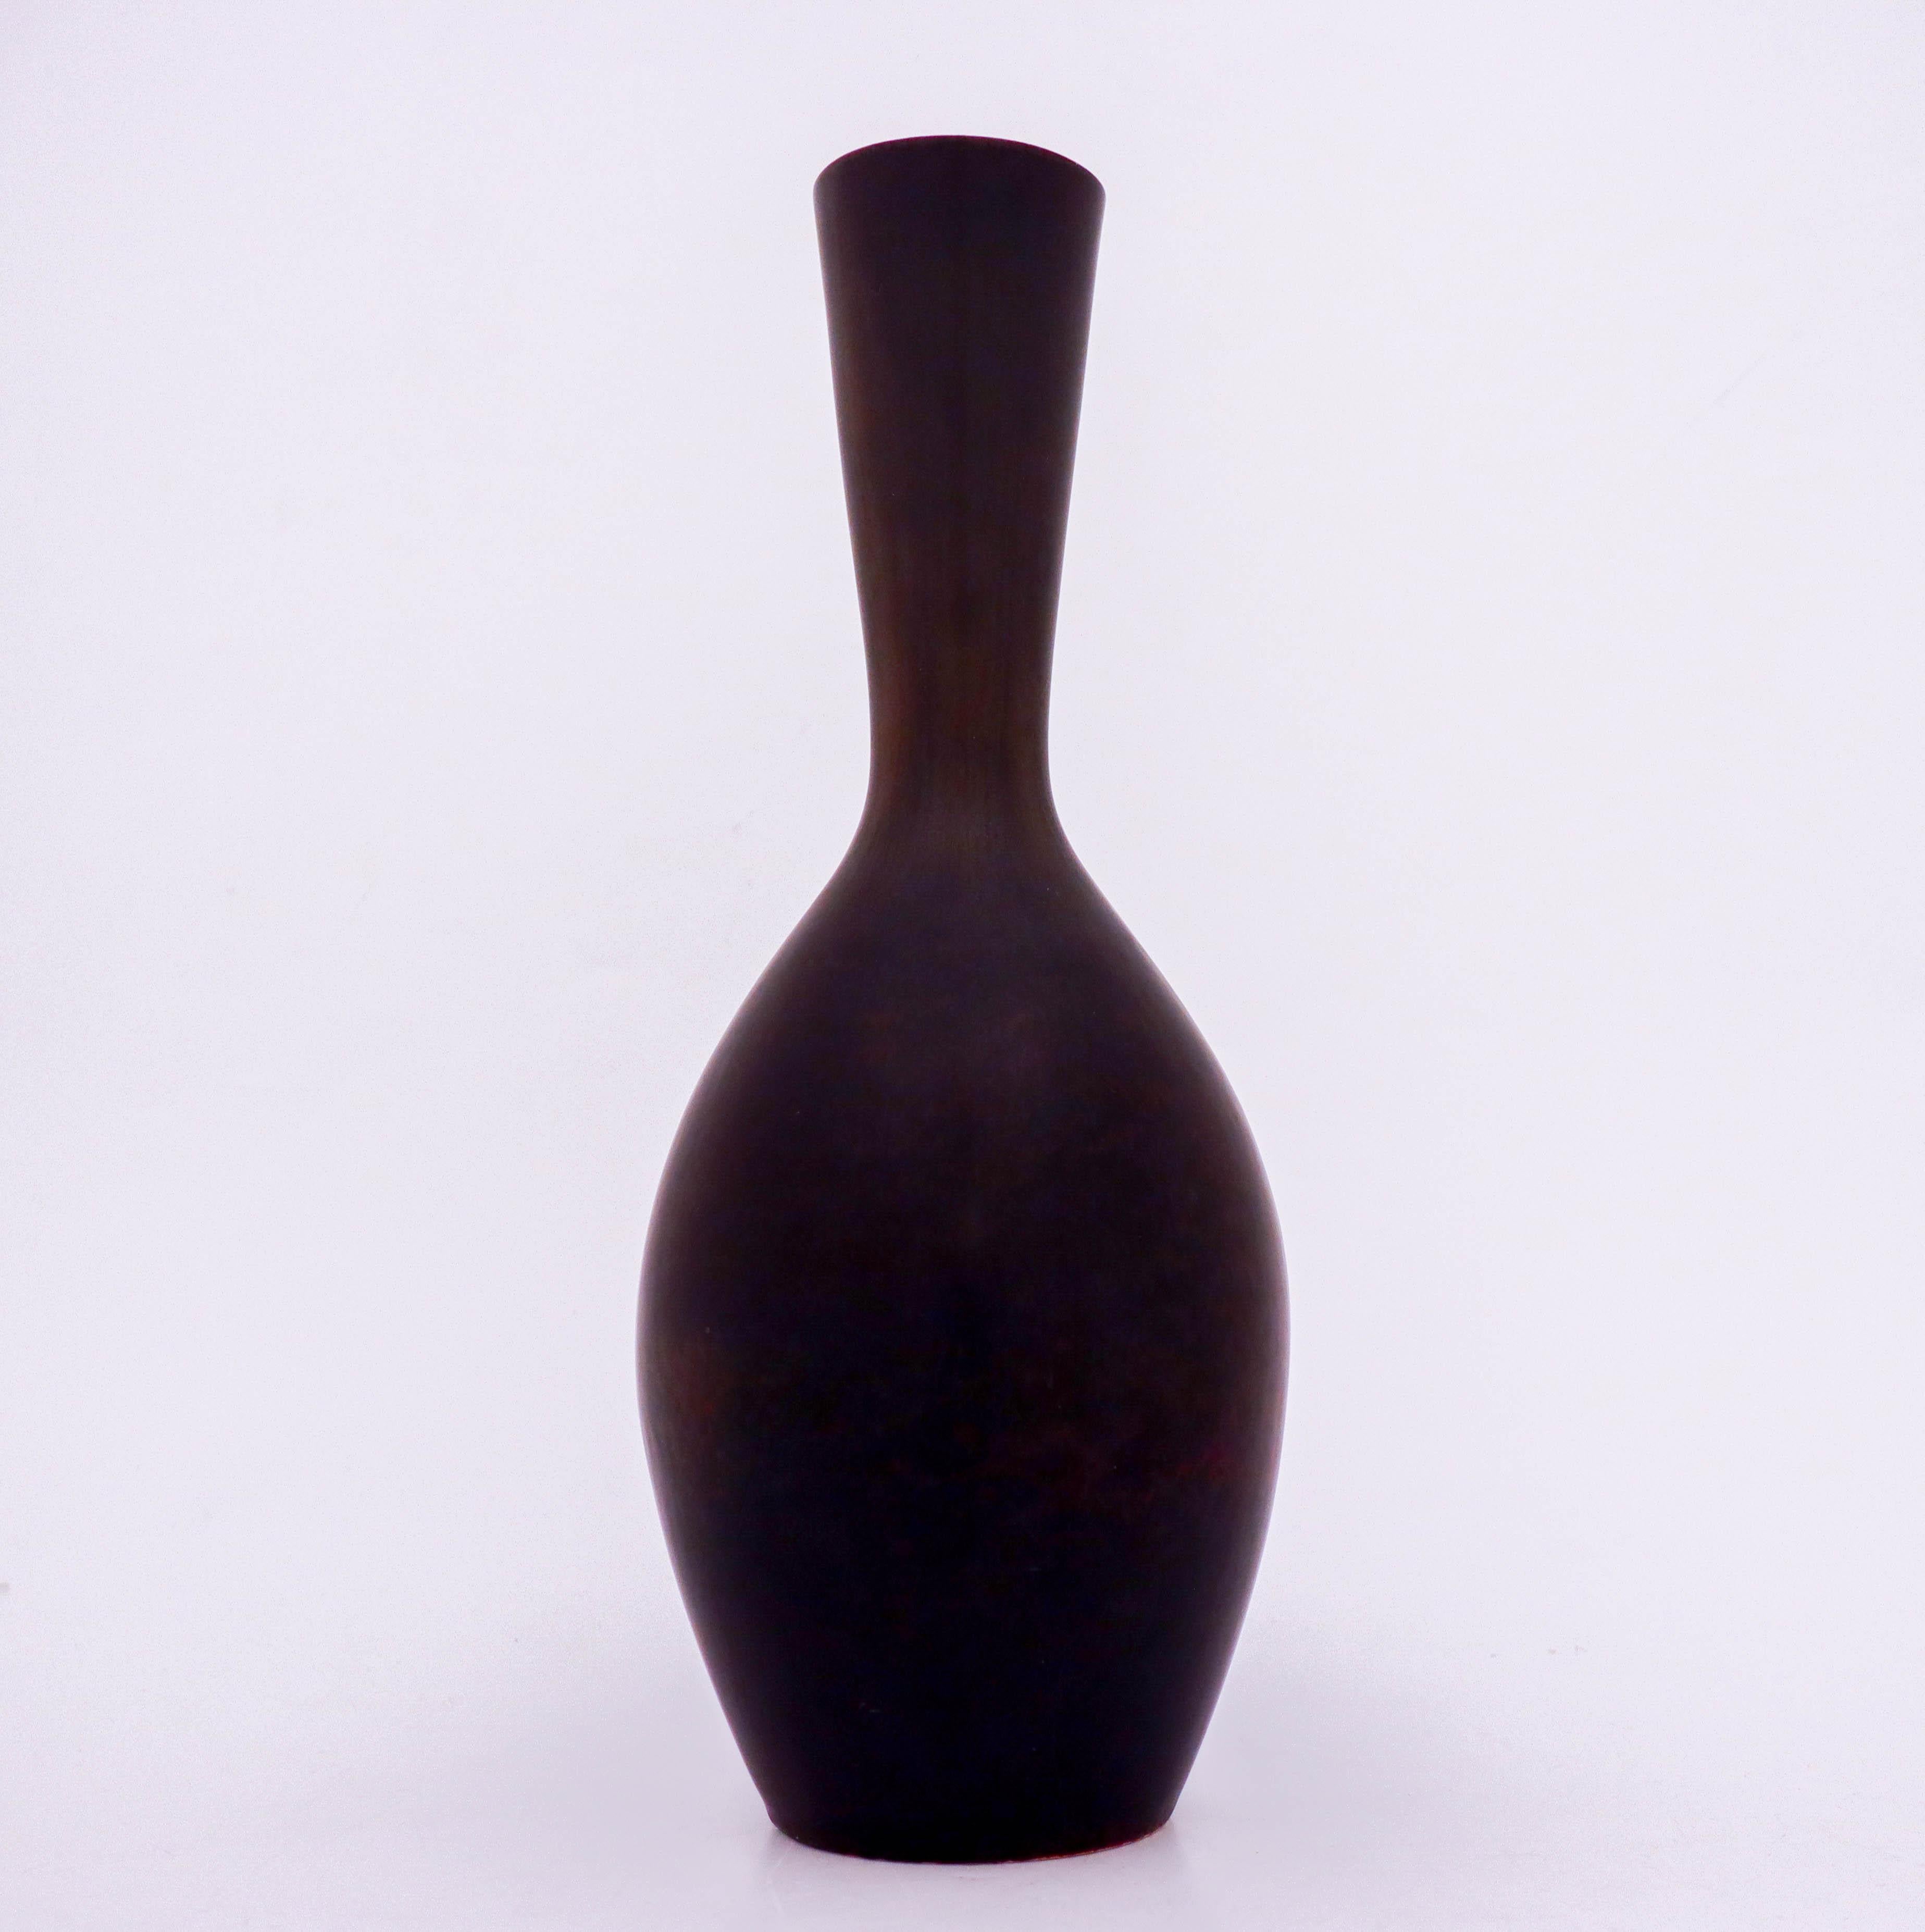 Large vase by Carl-Harry Stålhane with a beautiful brown and black glaze. It is made in the 1950s and is in excellent condition.